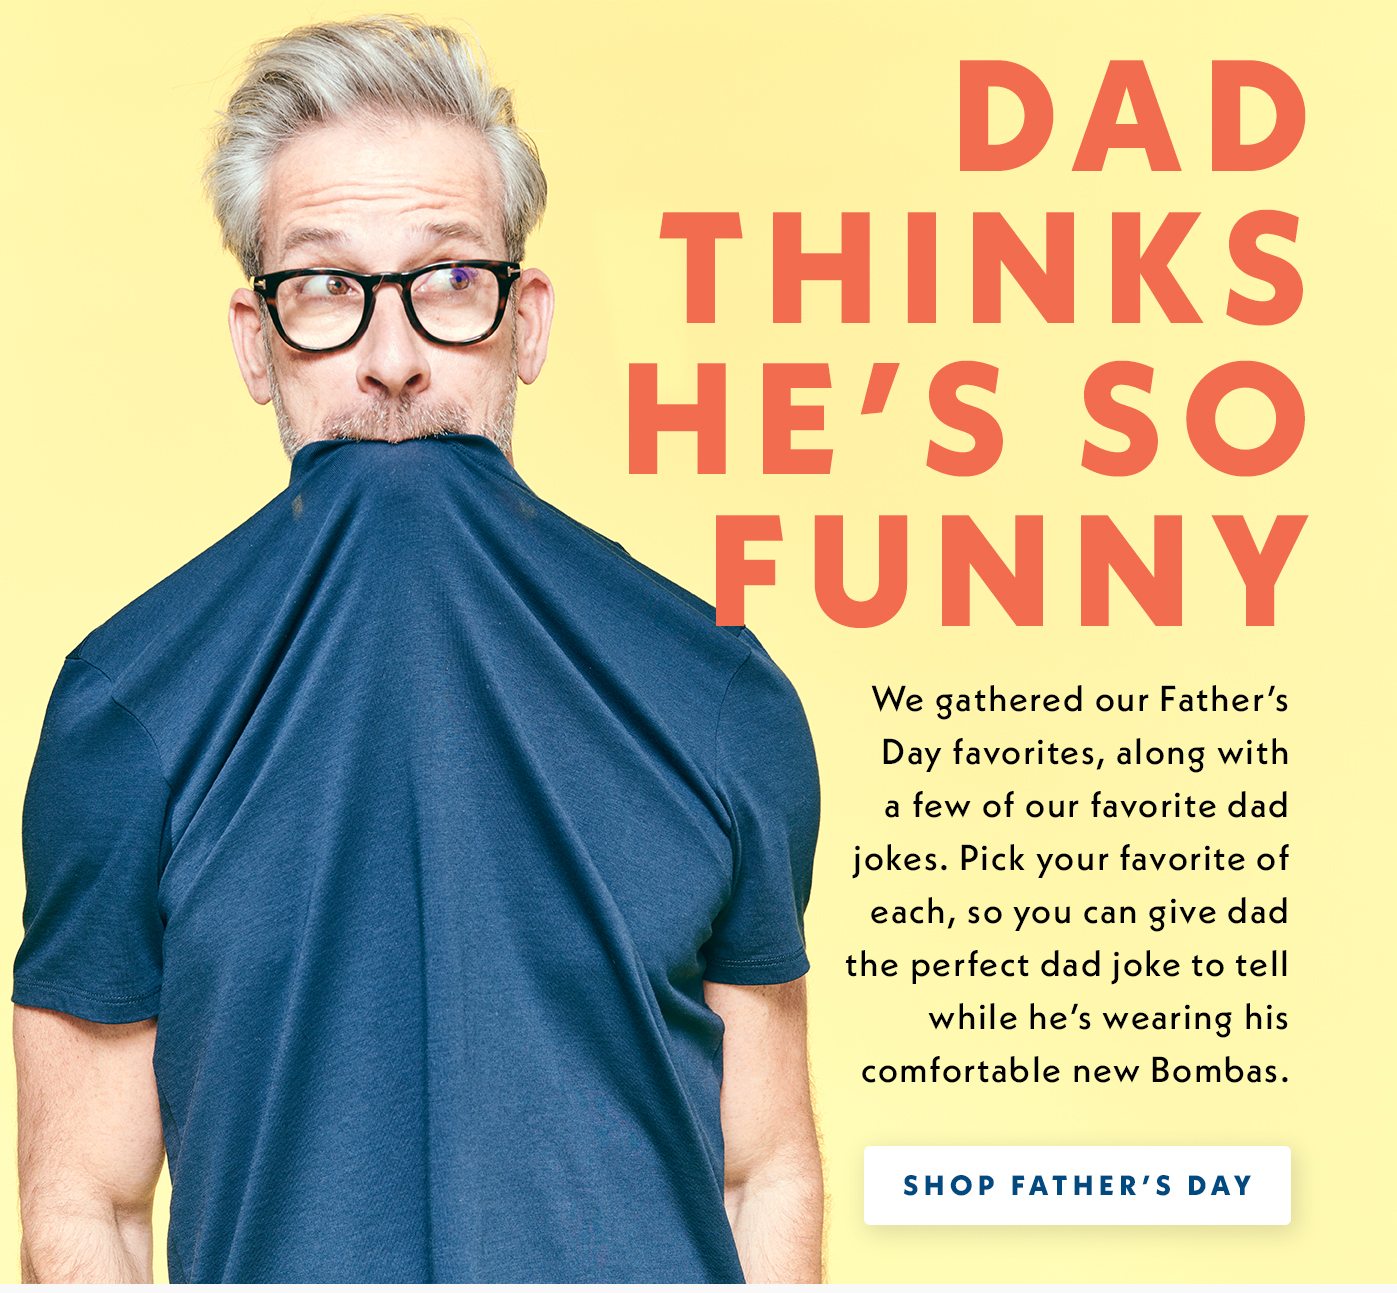 Dad thinks he's so funny | We organized our Father's Day favorites with their corresponding Dad jokes. Pick out Dad's gift according to the joke you can totally hear him making.